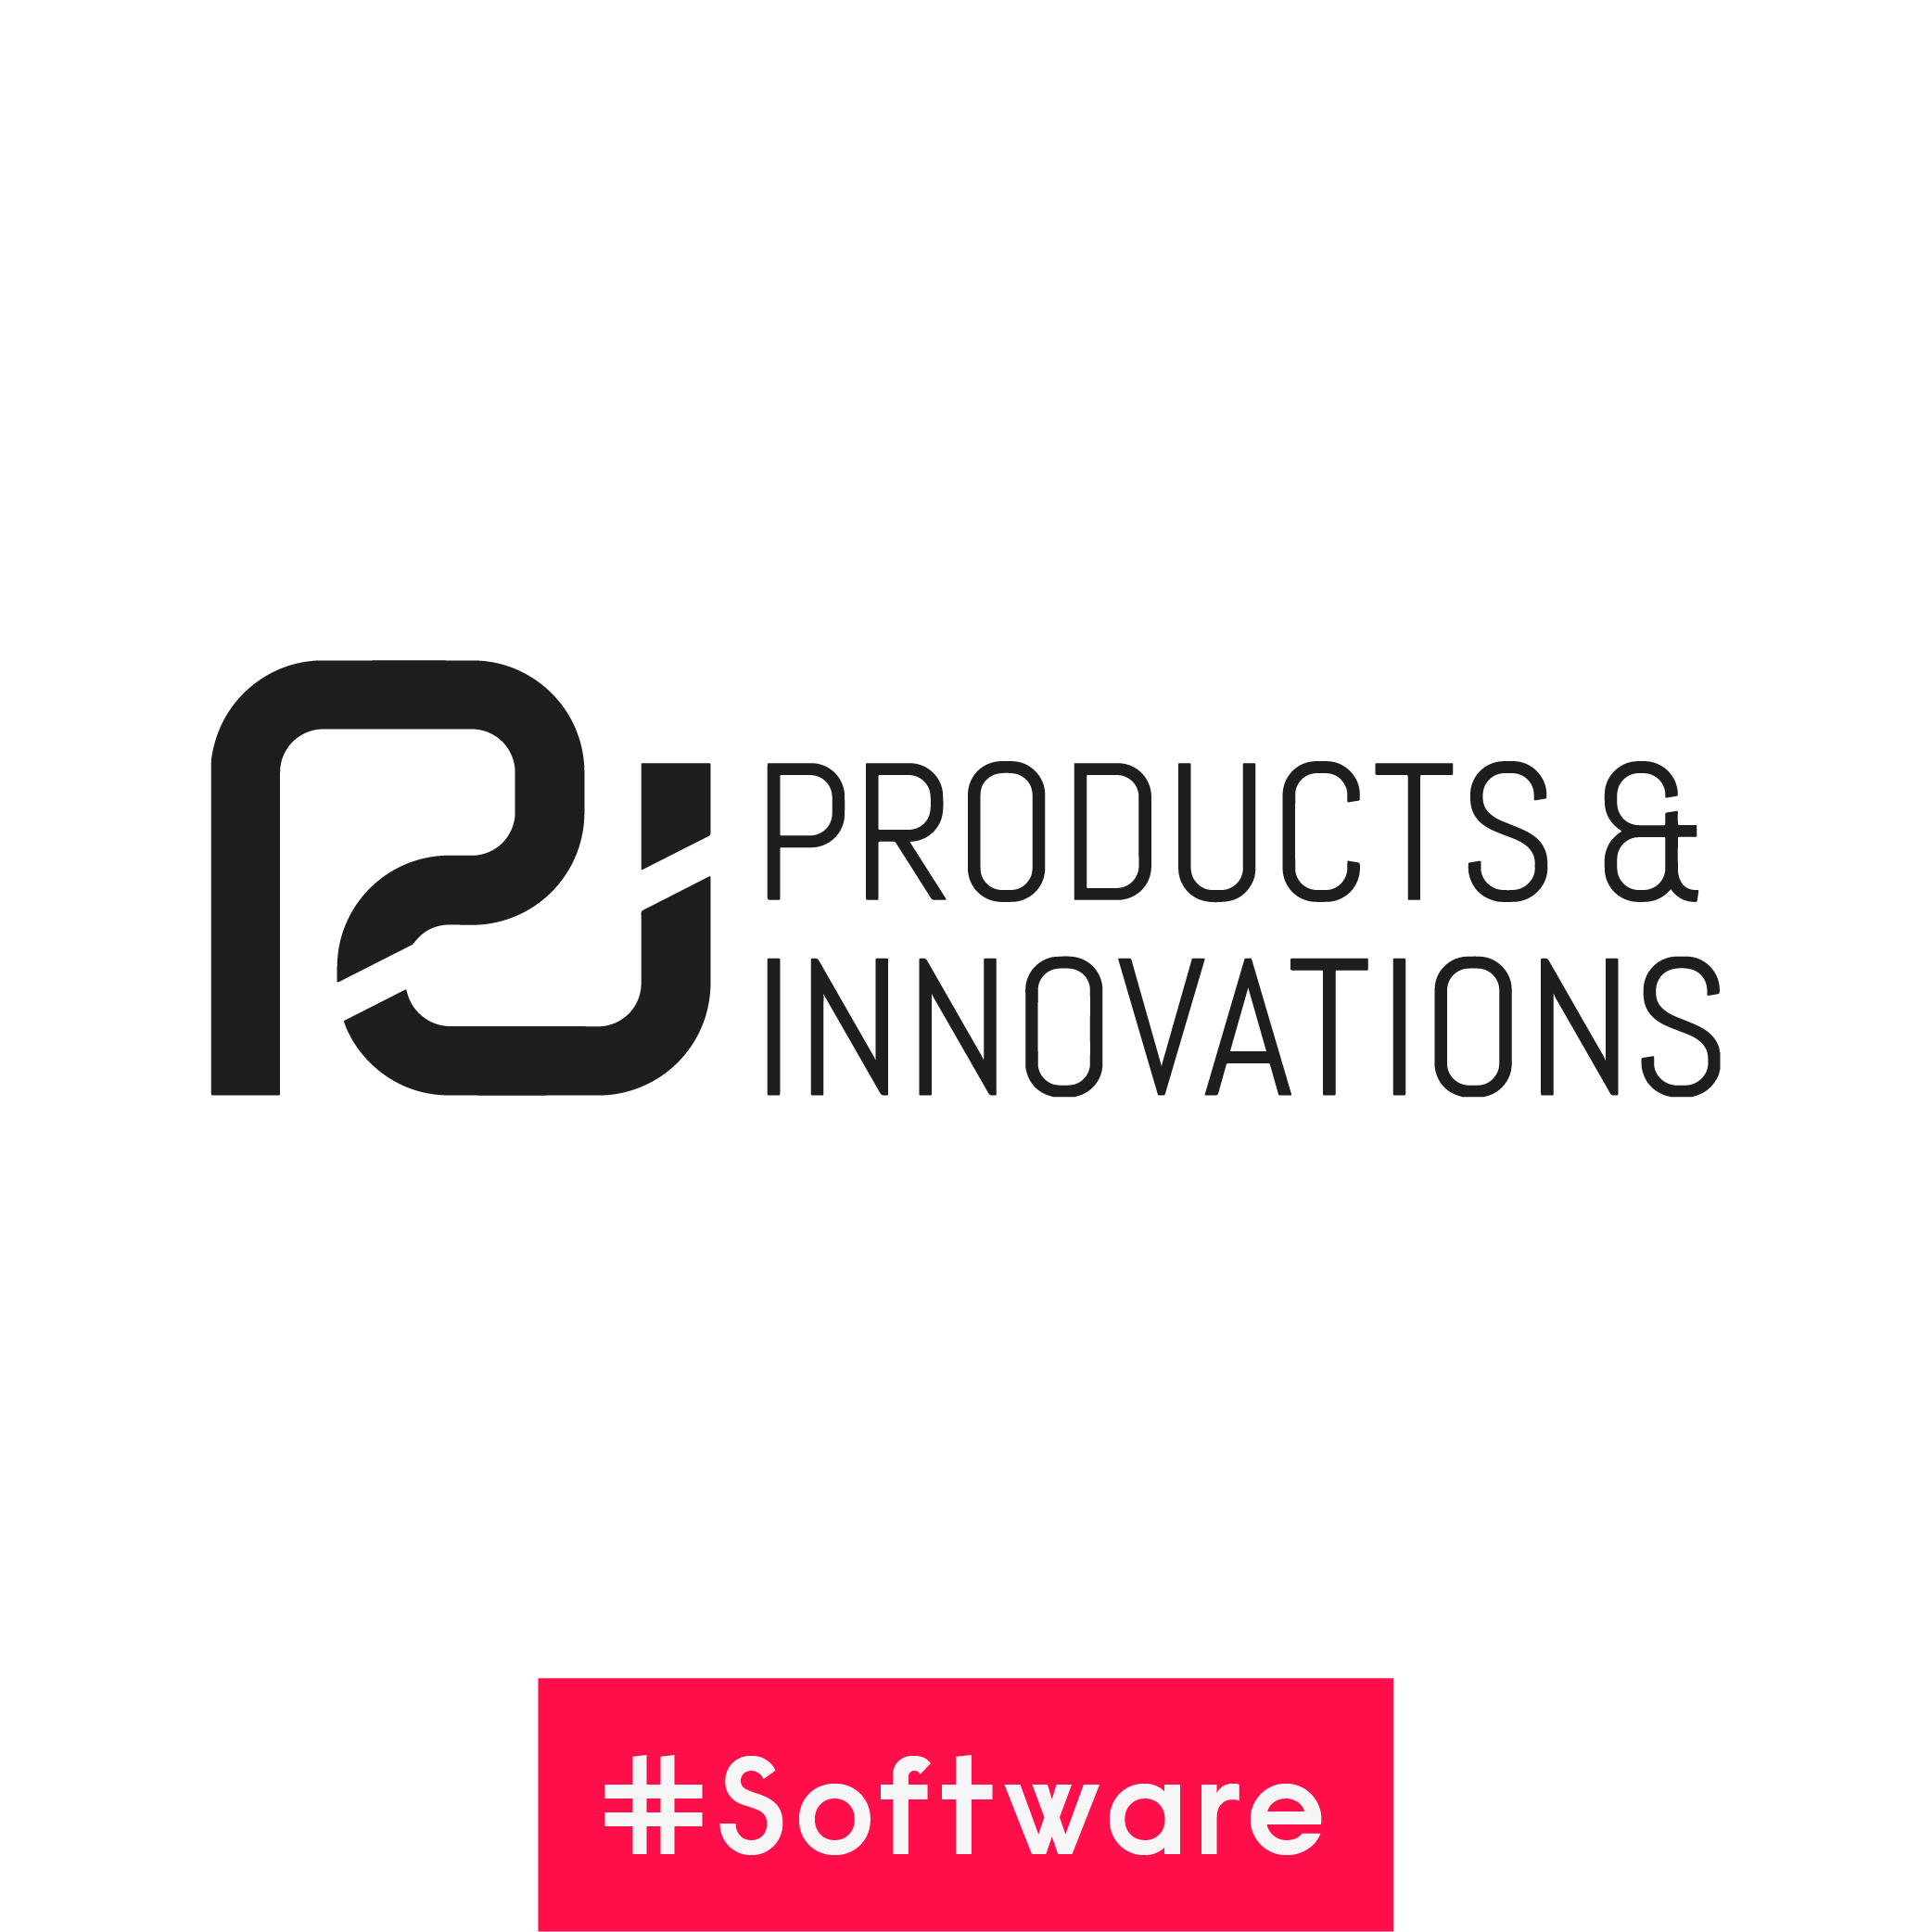 PI Products & Innovations